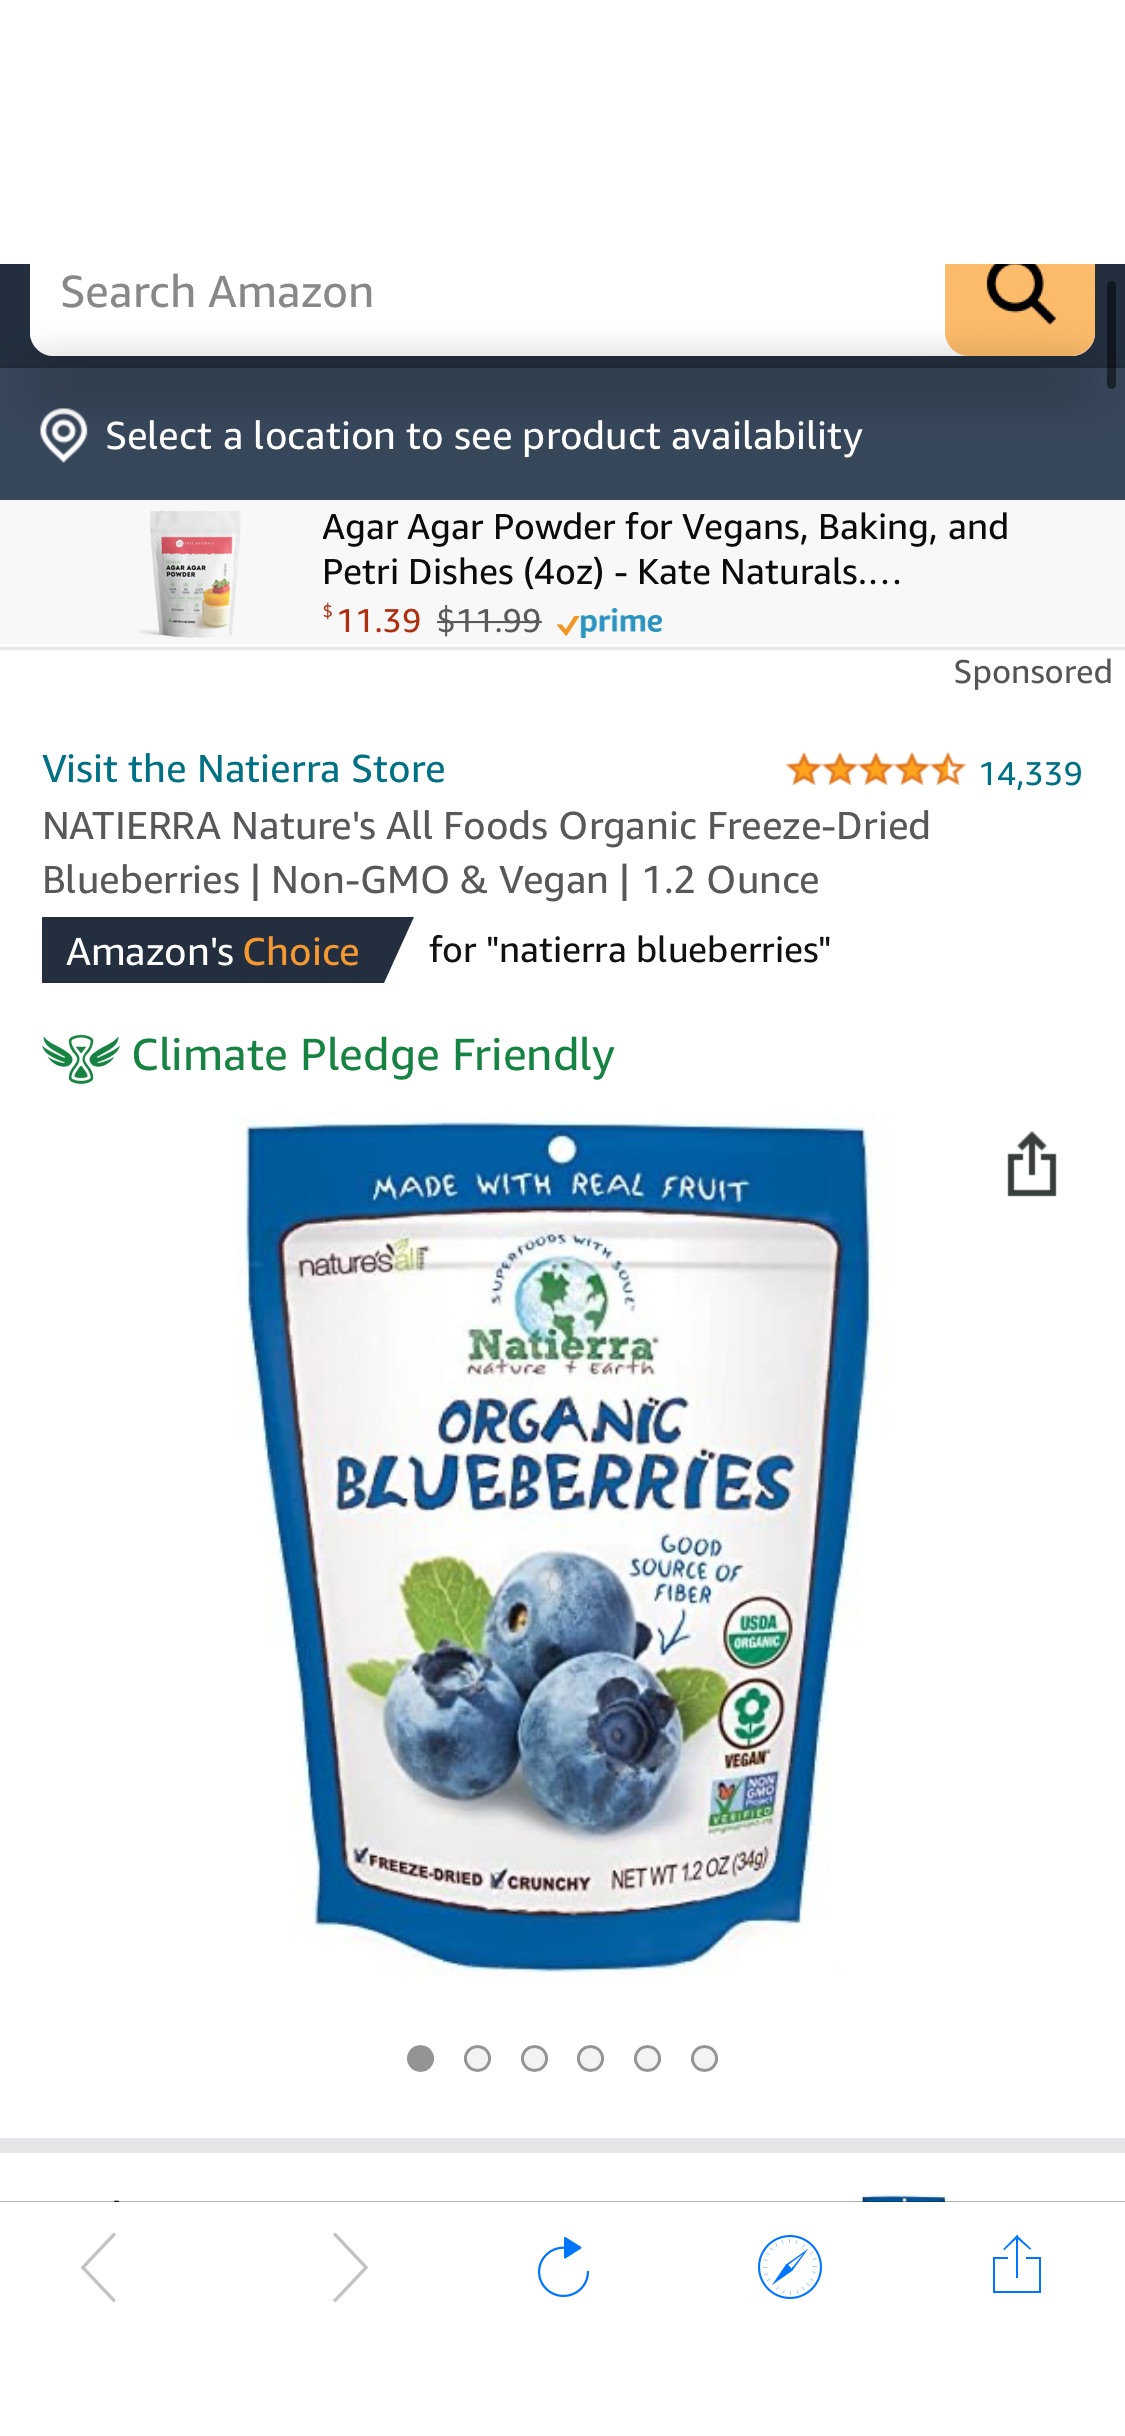 Amazon.com : NATIERRA Nature's All Foods Organic Freeze-Dried Blueberries | Non-GMO & Vegan | 1.2 Ounce : Dried Fruits : Everything Else 有机冻蓝莓干